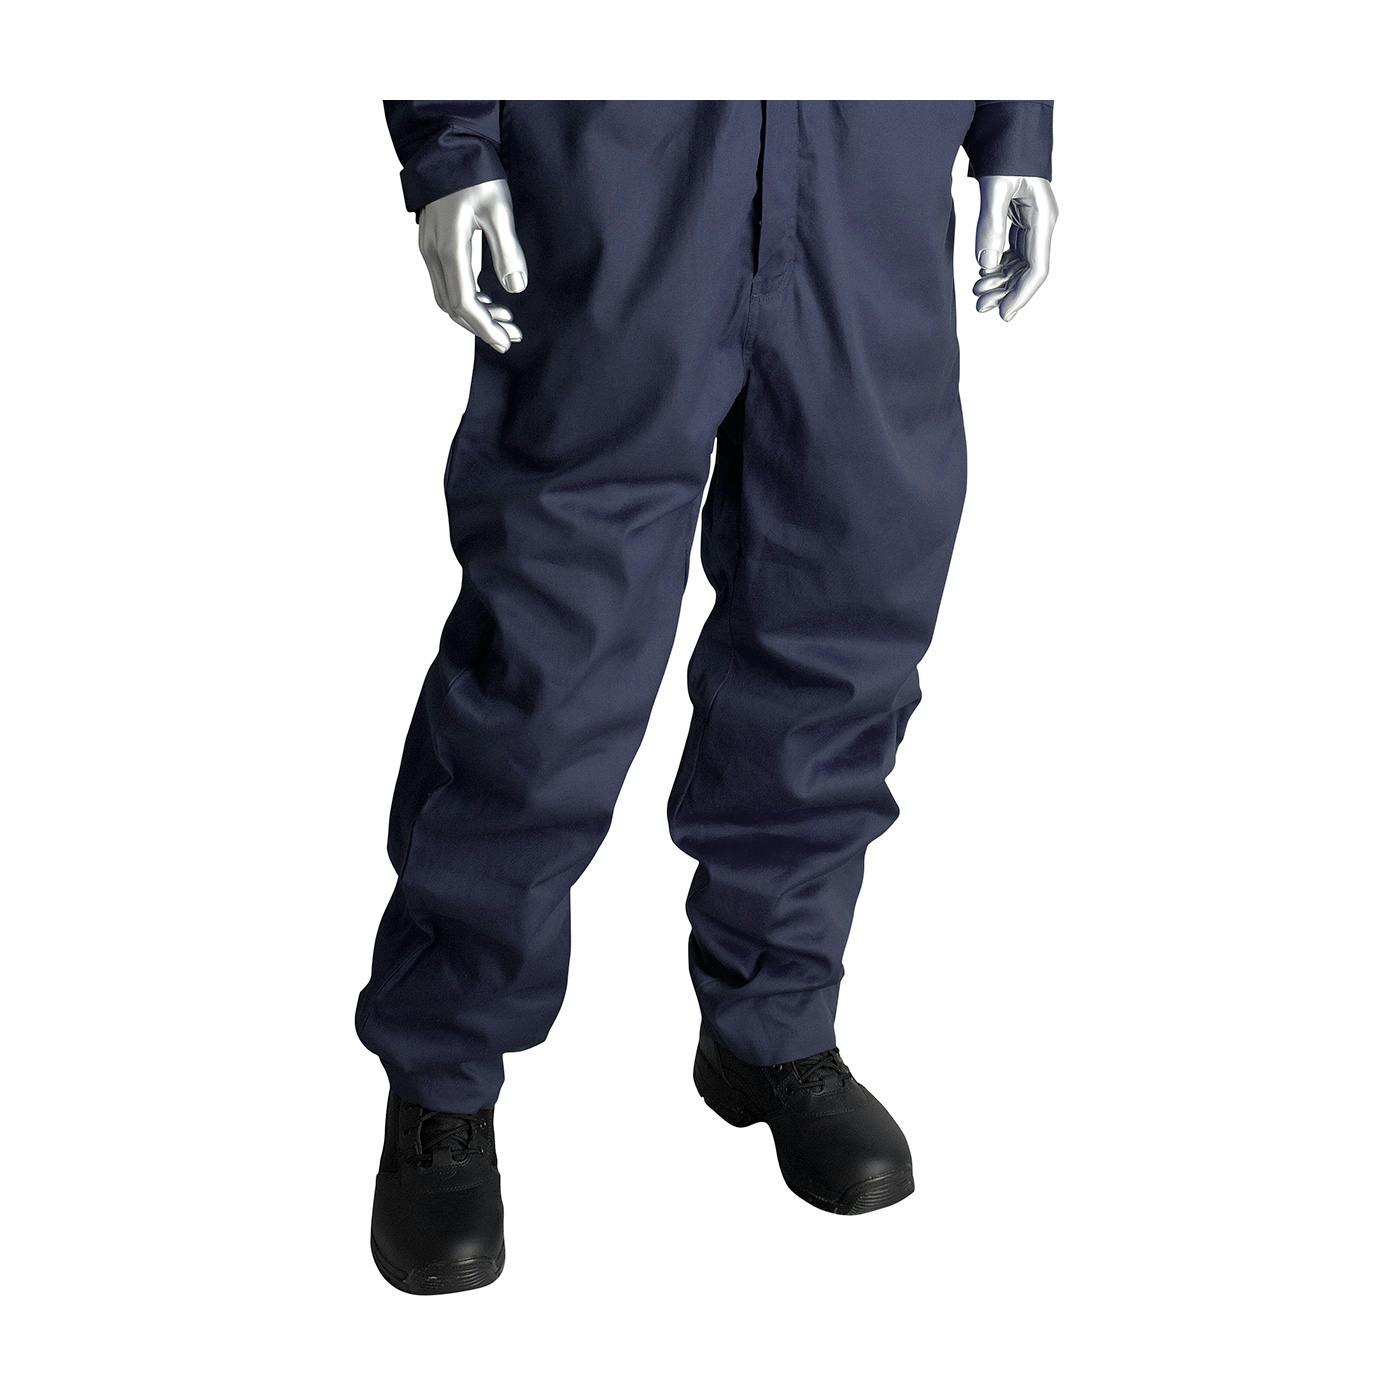 AR/FR Dual Certified Coverall with Zipper Closure - 9.2 Cal/cm2, Navy (385-FRSC) - 5XL